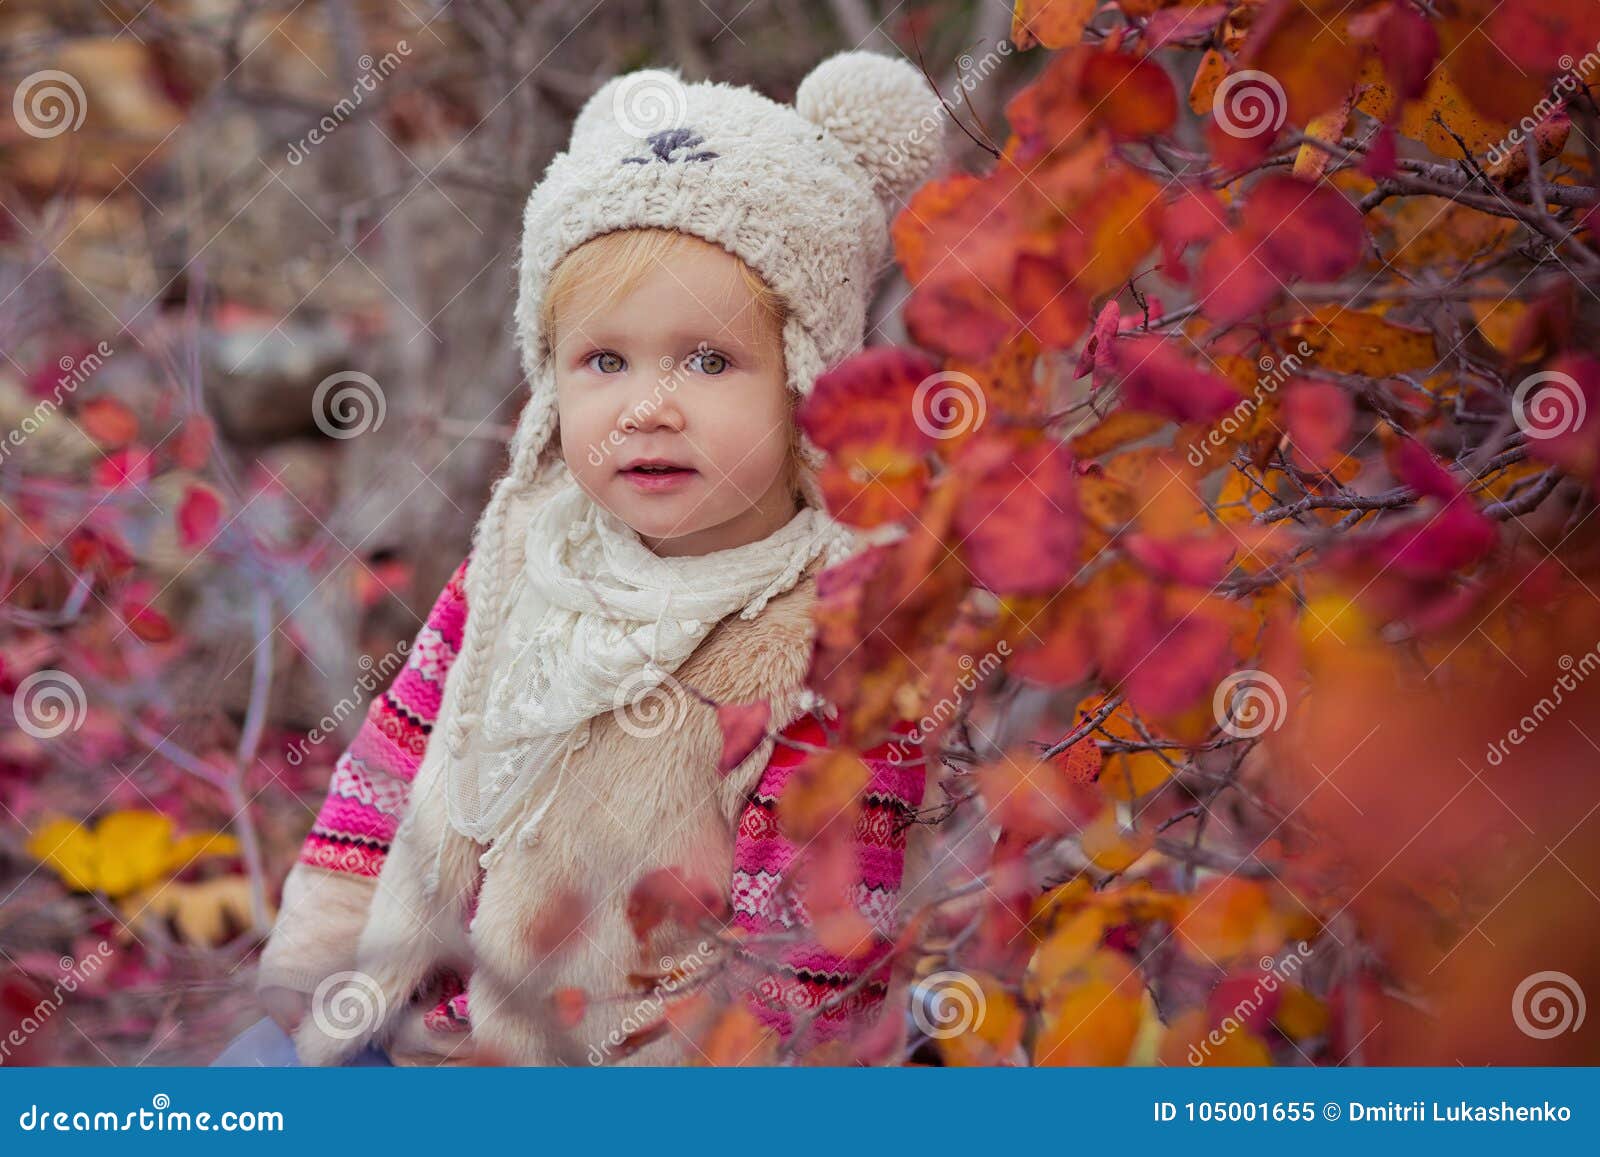 cute young russian baby girl stylish dressed in warm white fur handmade jacket blue jeans boots and hooked hat teddy bear posing i